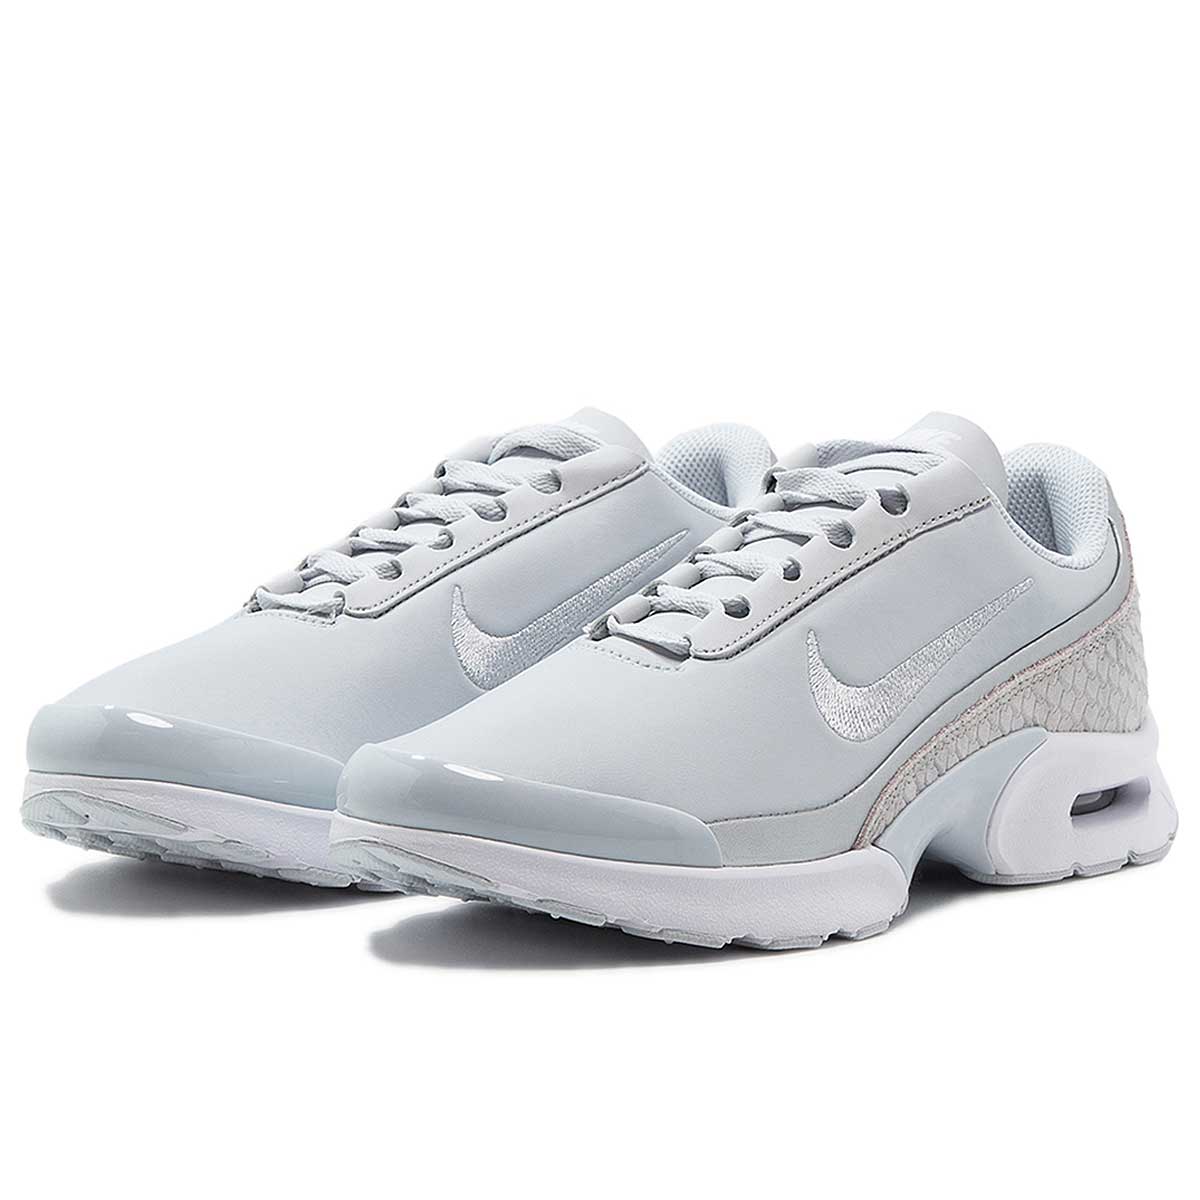 Buy W NIKE AIR MAX JEWELL PRM TXT for N 